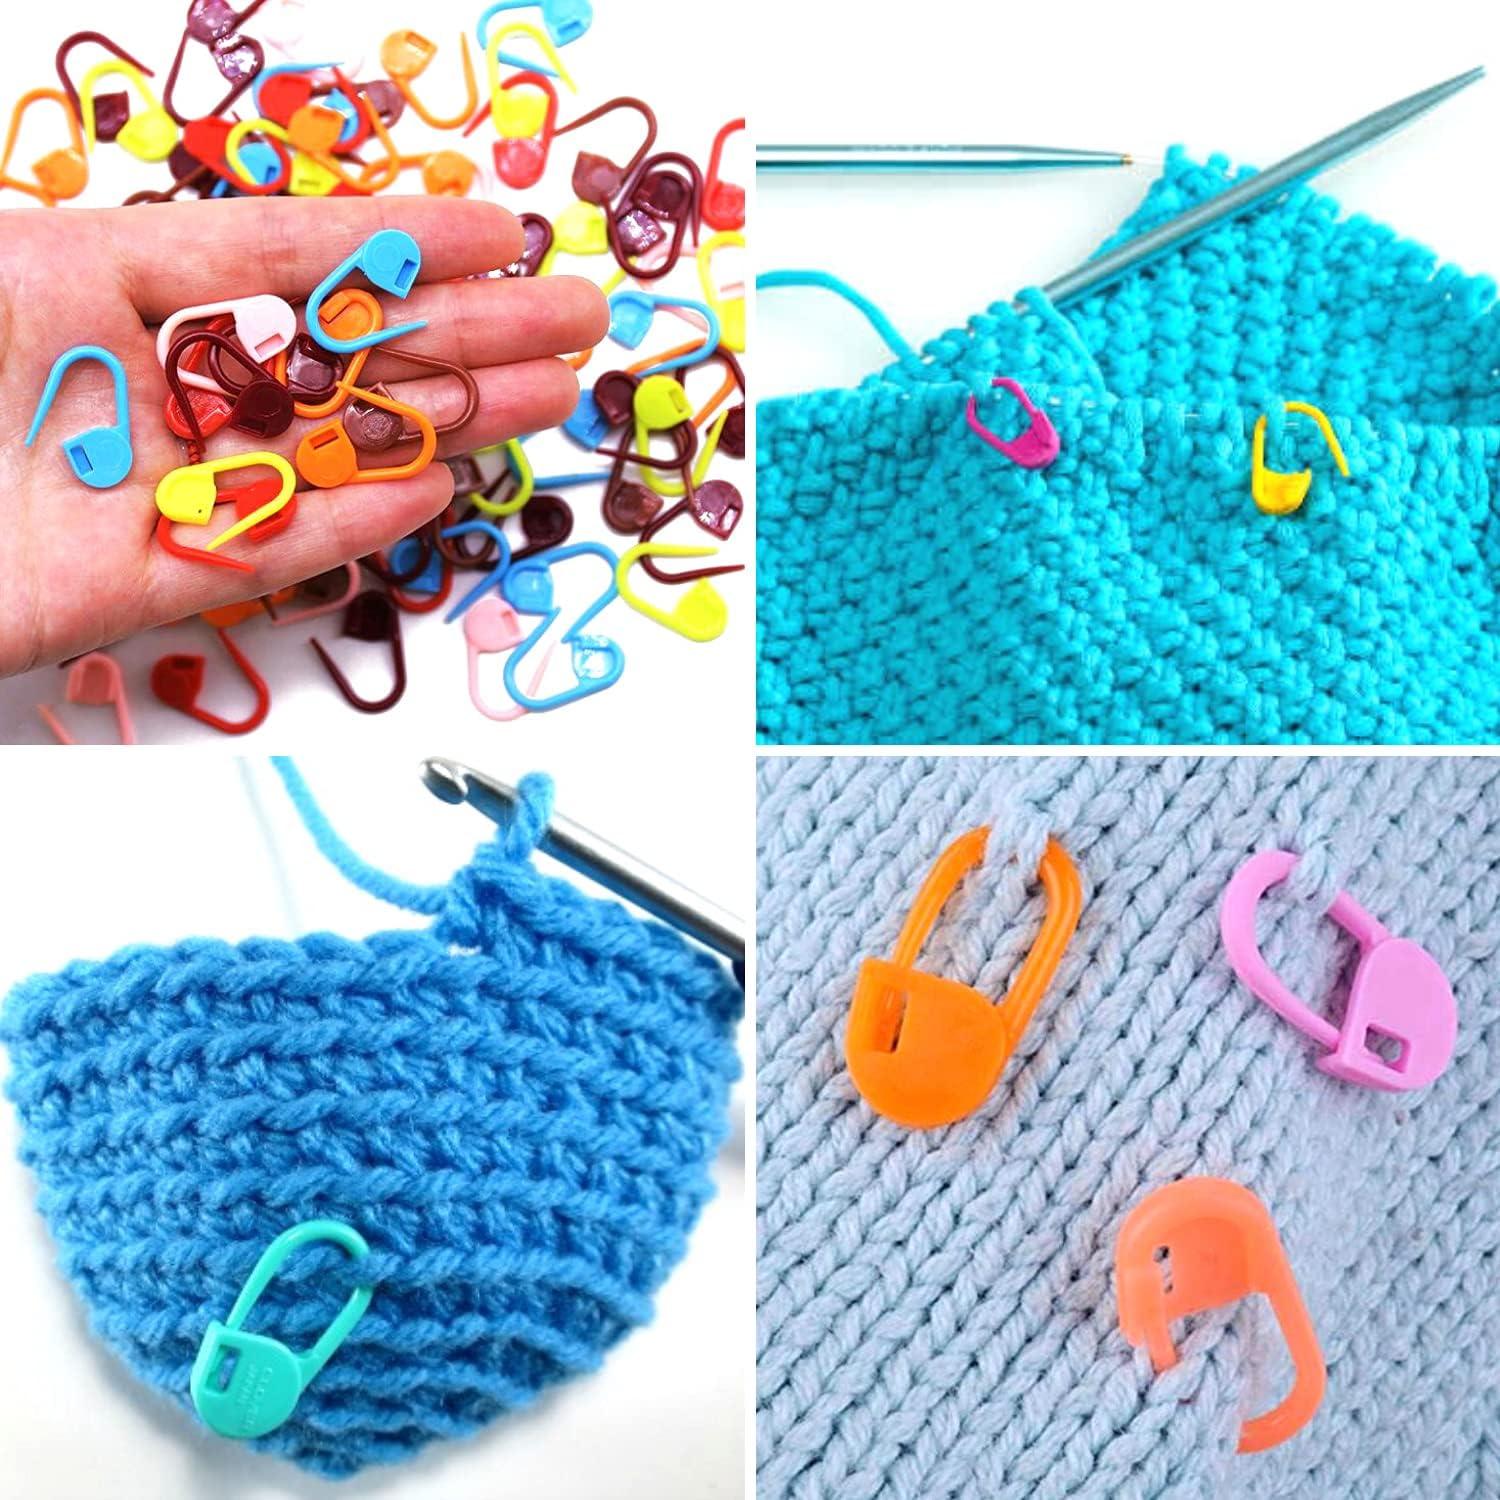 Make Stitch Markers for Knitting or Crochet » Dollar Store Crafts